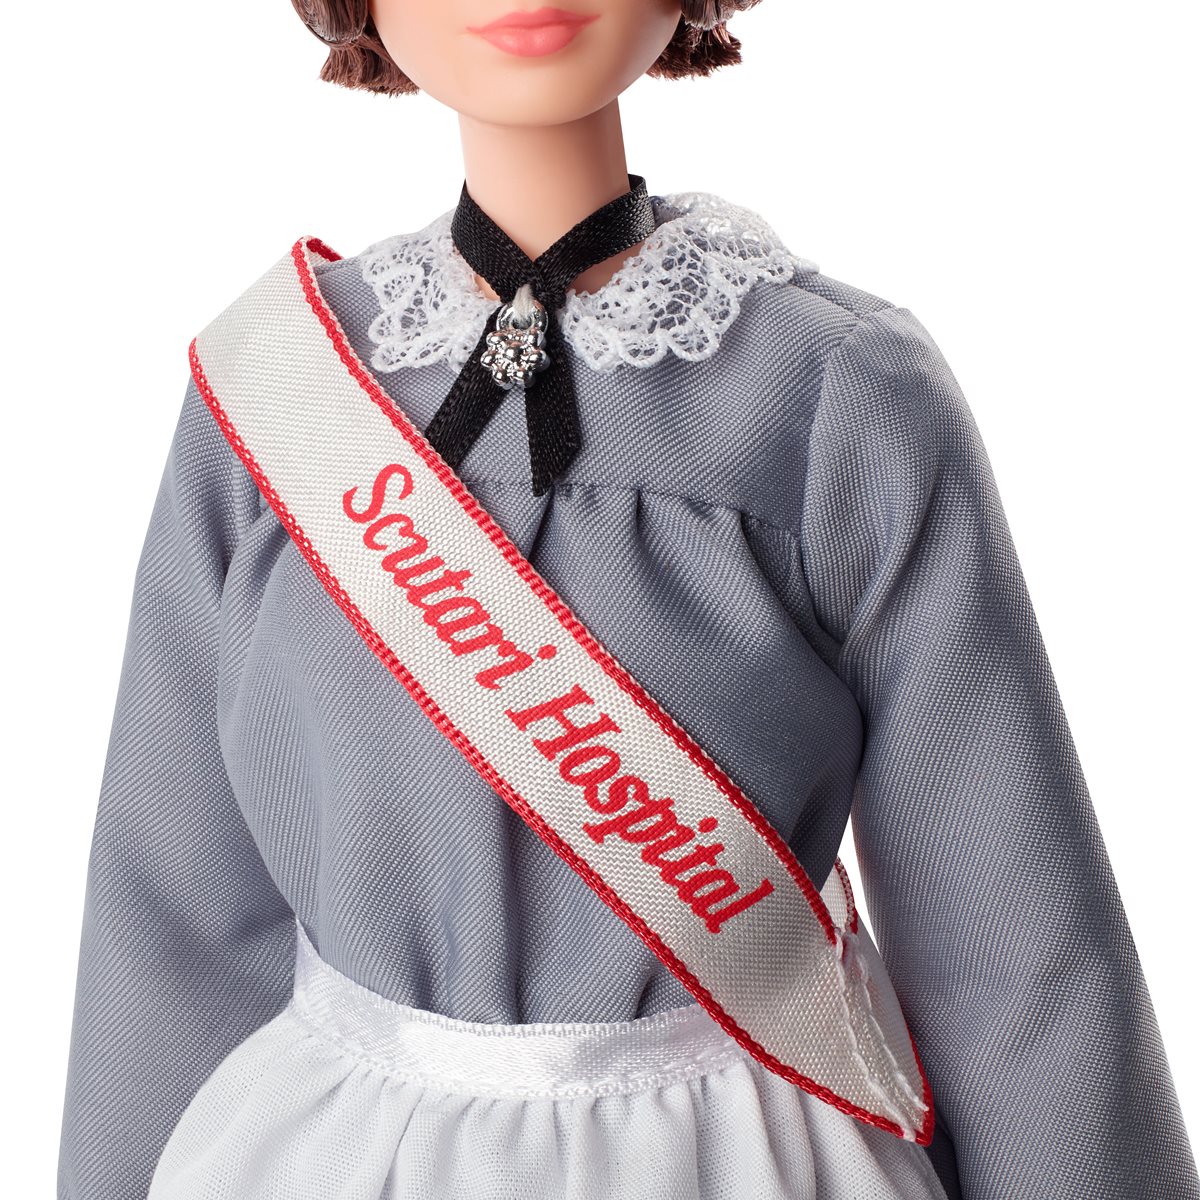 Approx Wearing Nurse’s Uniform and Accessories for sale online 12-in Barbie Inspiring Women Florence Nightingale Collectible Doll